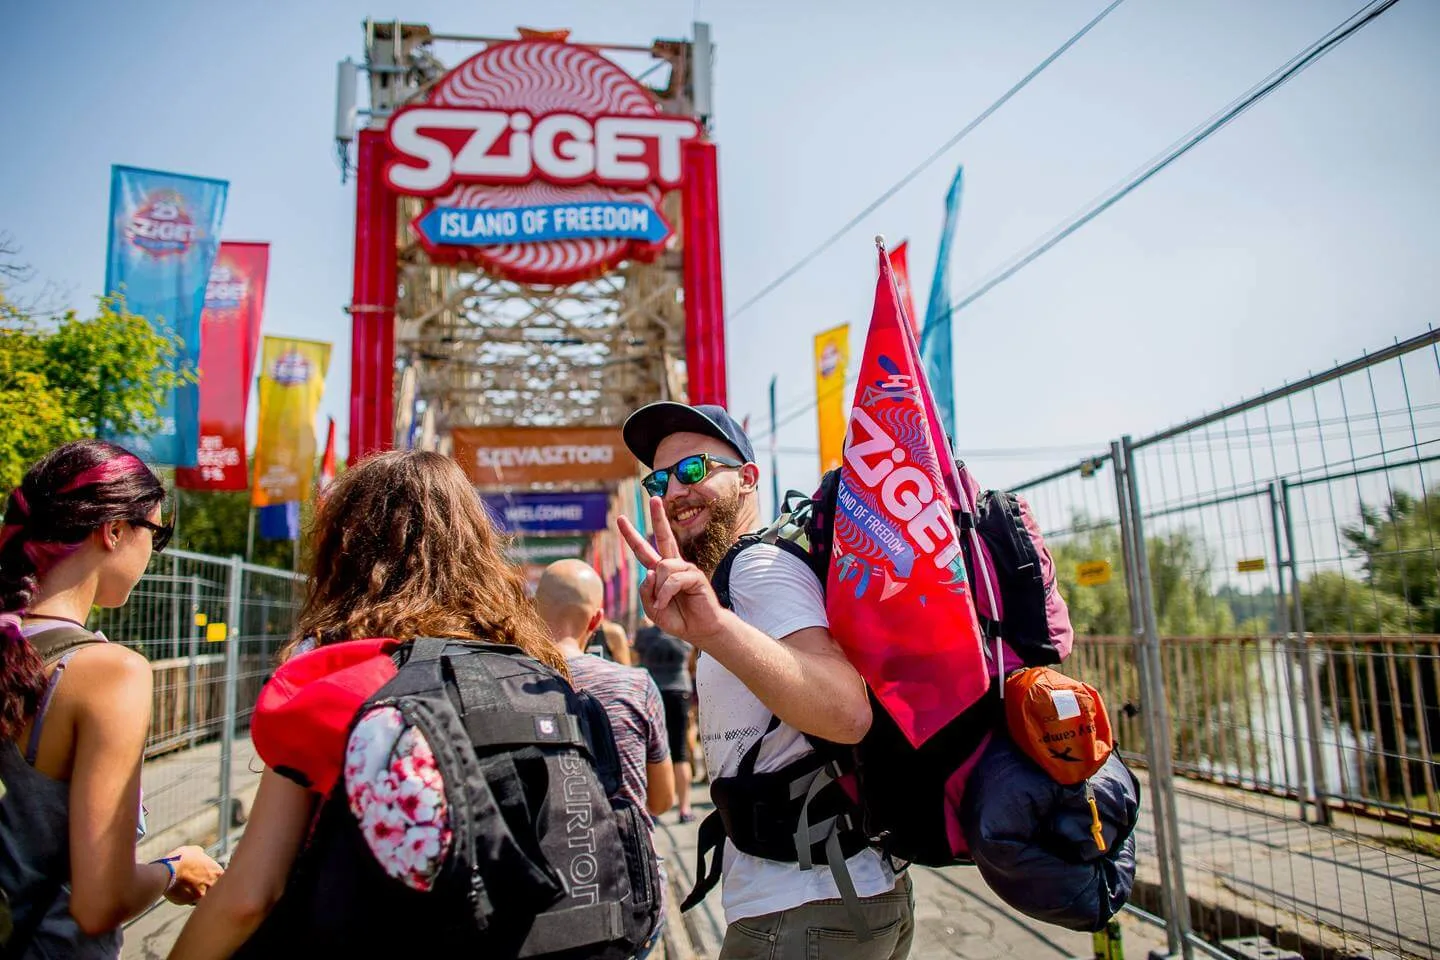 Things to do at Sziget Festival